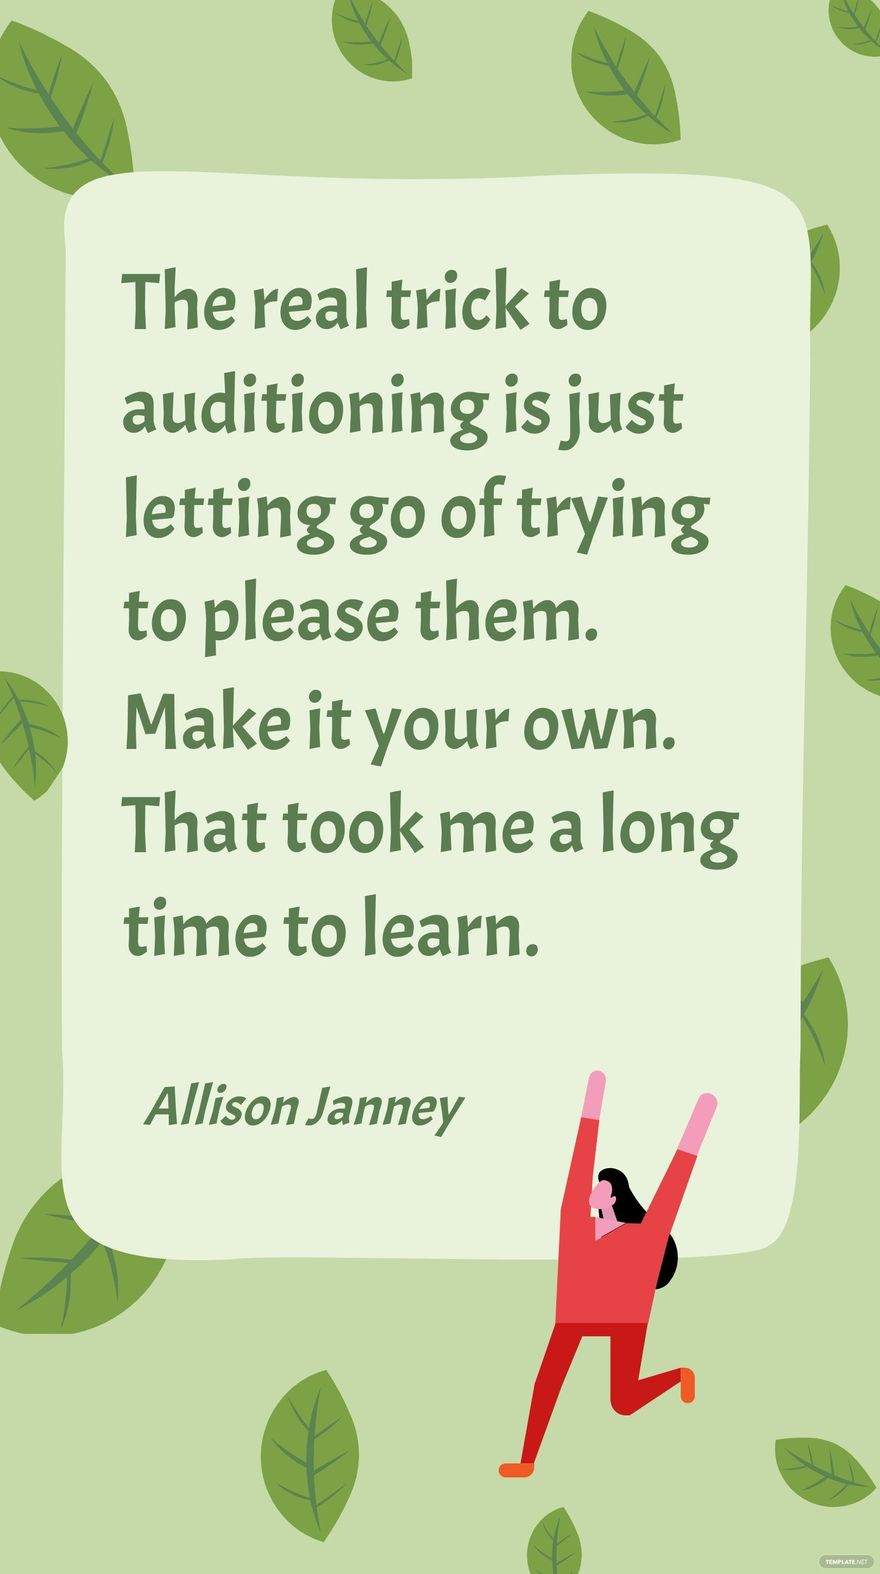 Free Allison Janney - The real trick to auditioning is just letting go of trying to please them. Make it your own. That took me a long time to learn. in JPG